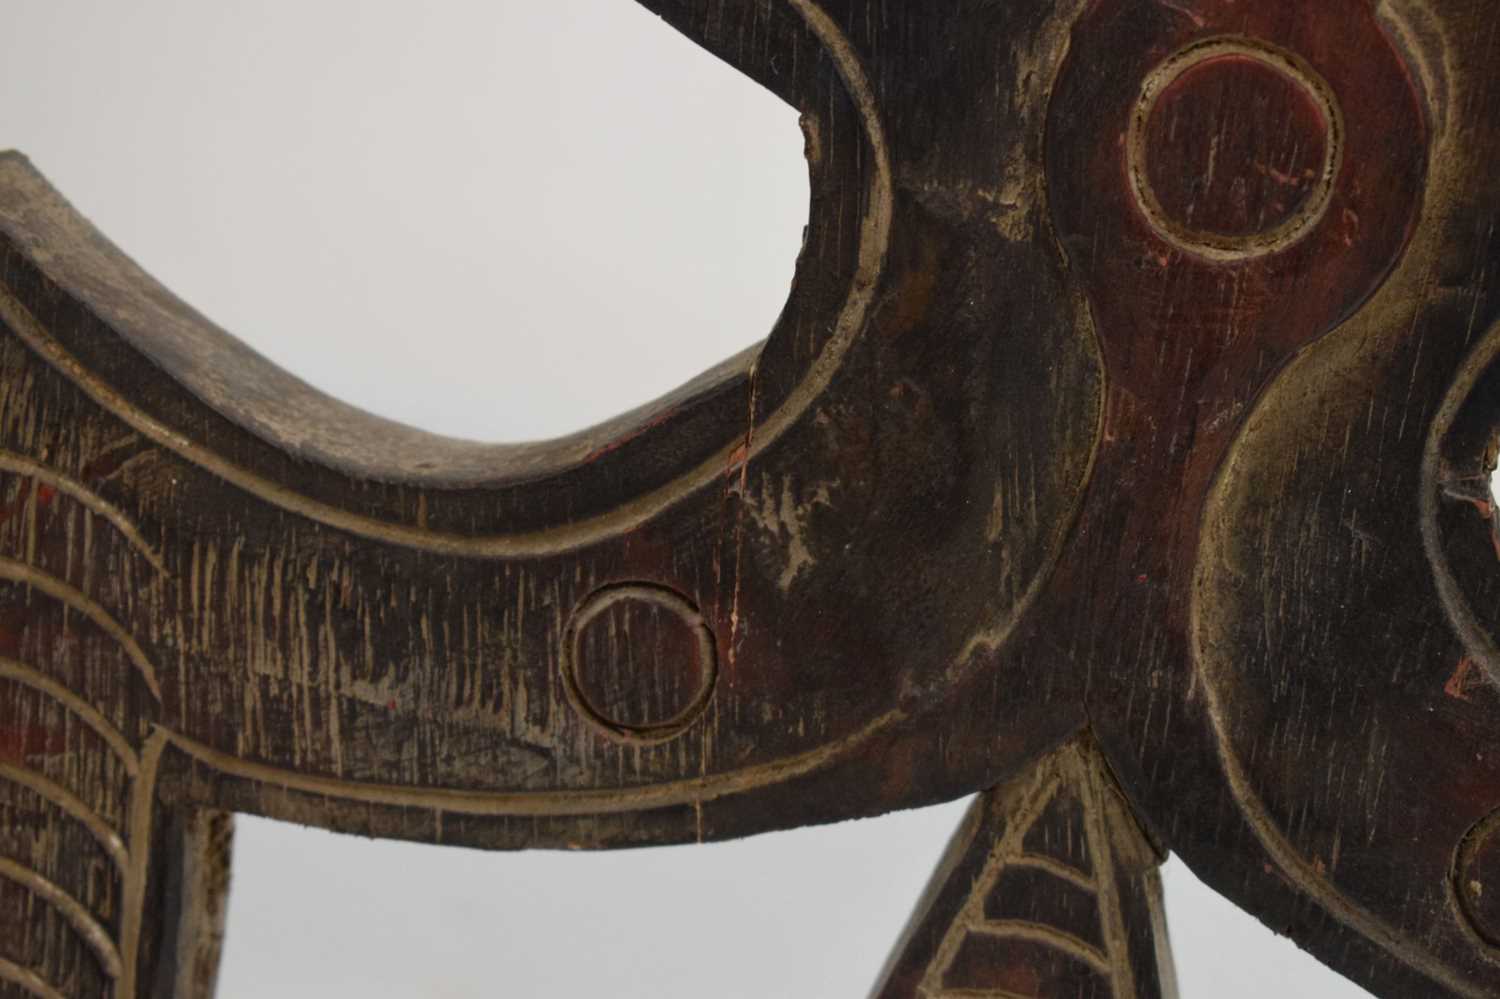 Ethnographica - Carved wooden skull hook / hanger or 'Agiba', Kerewa people, Papua New Guinea - Image 6 of 17